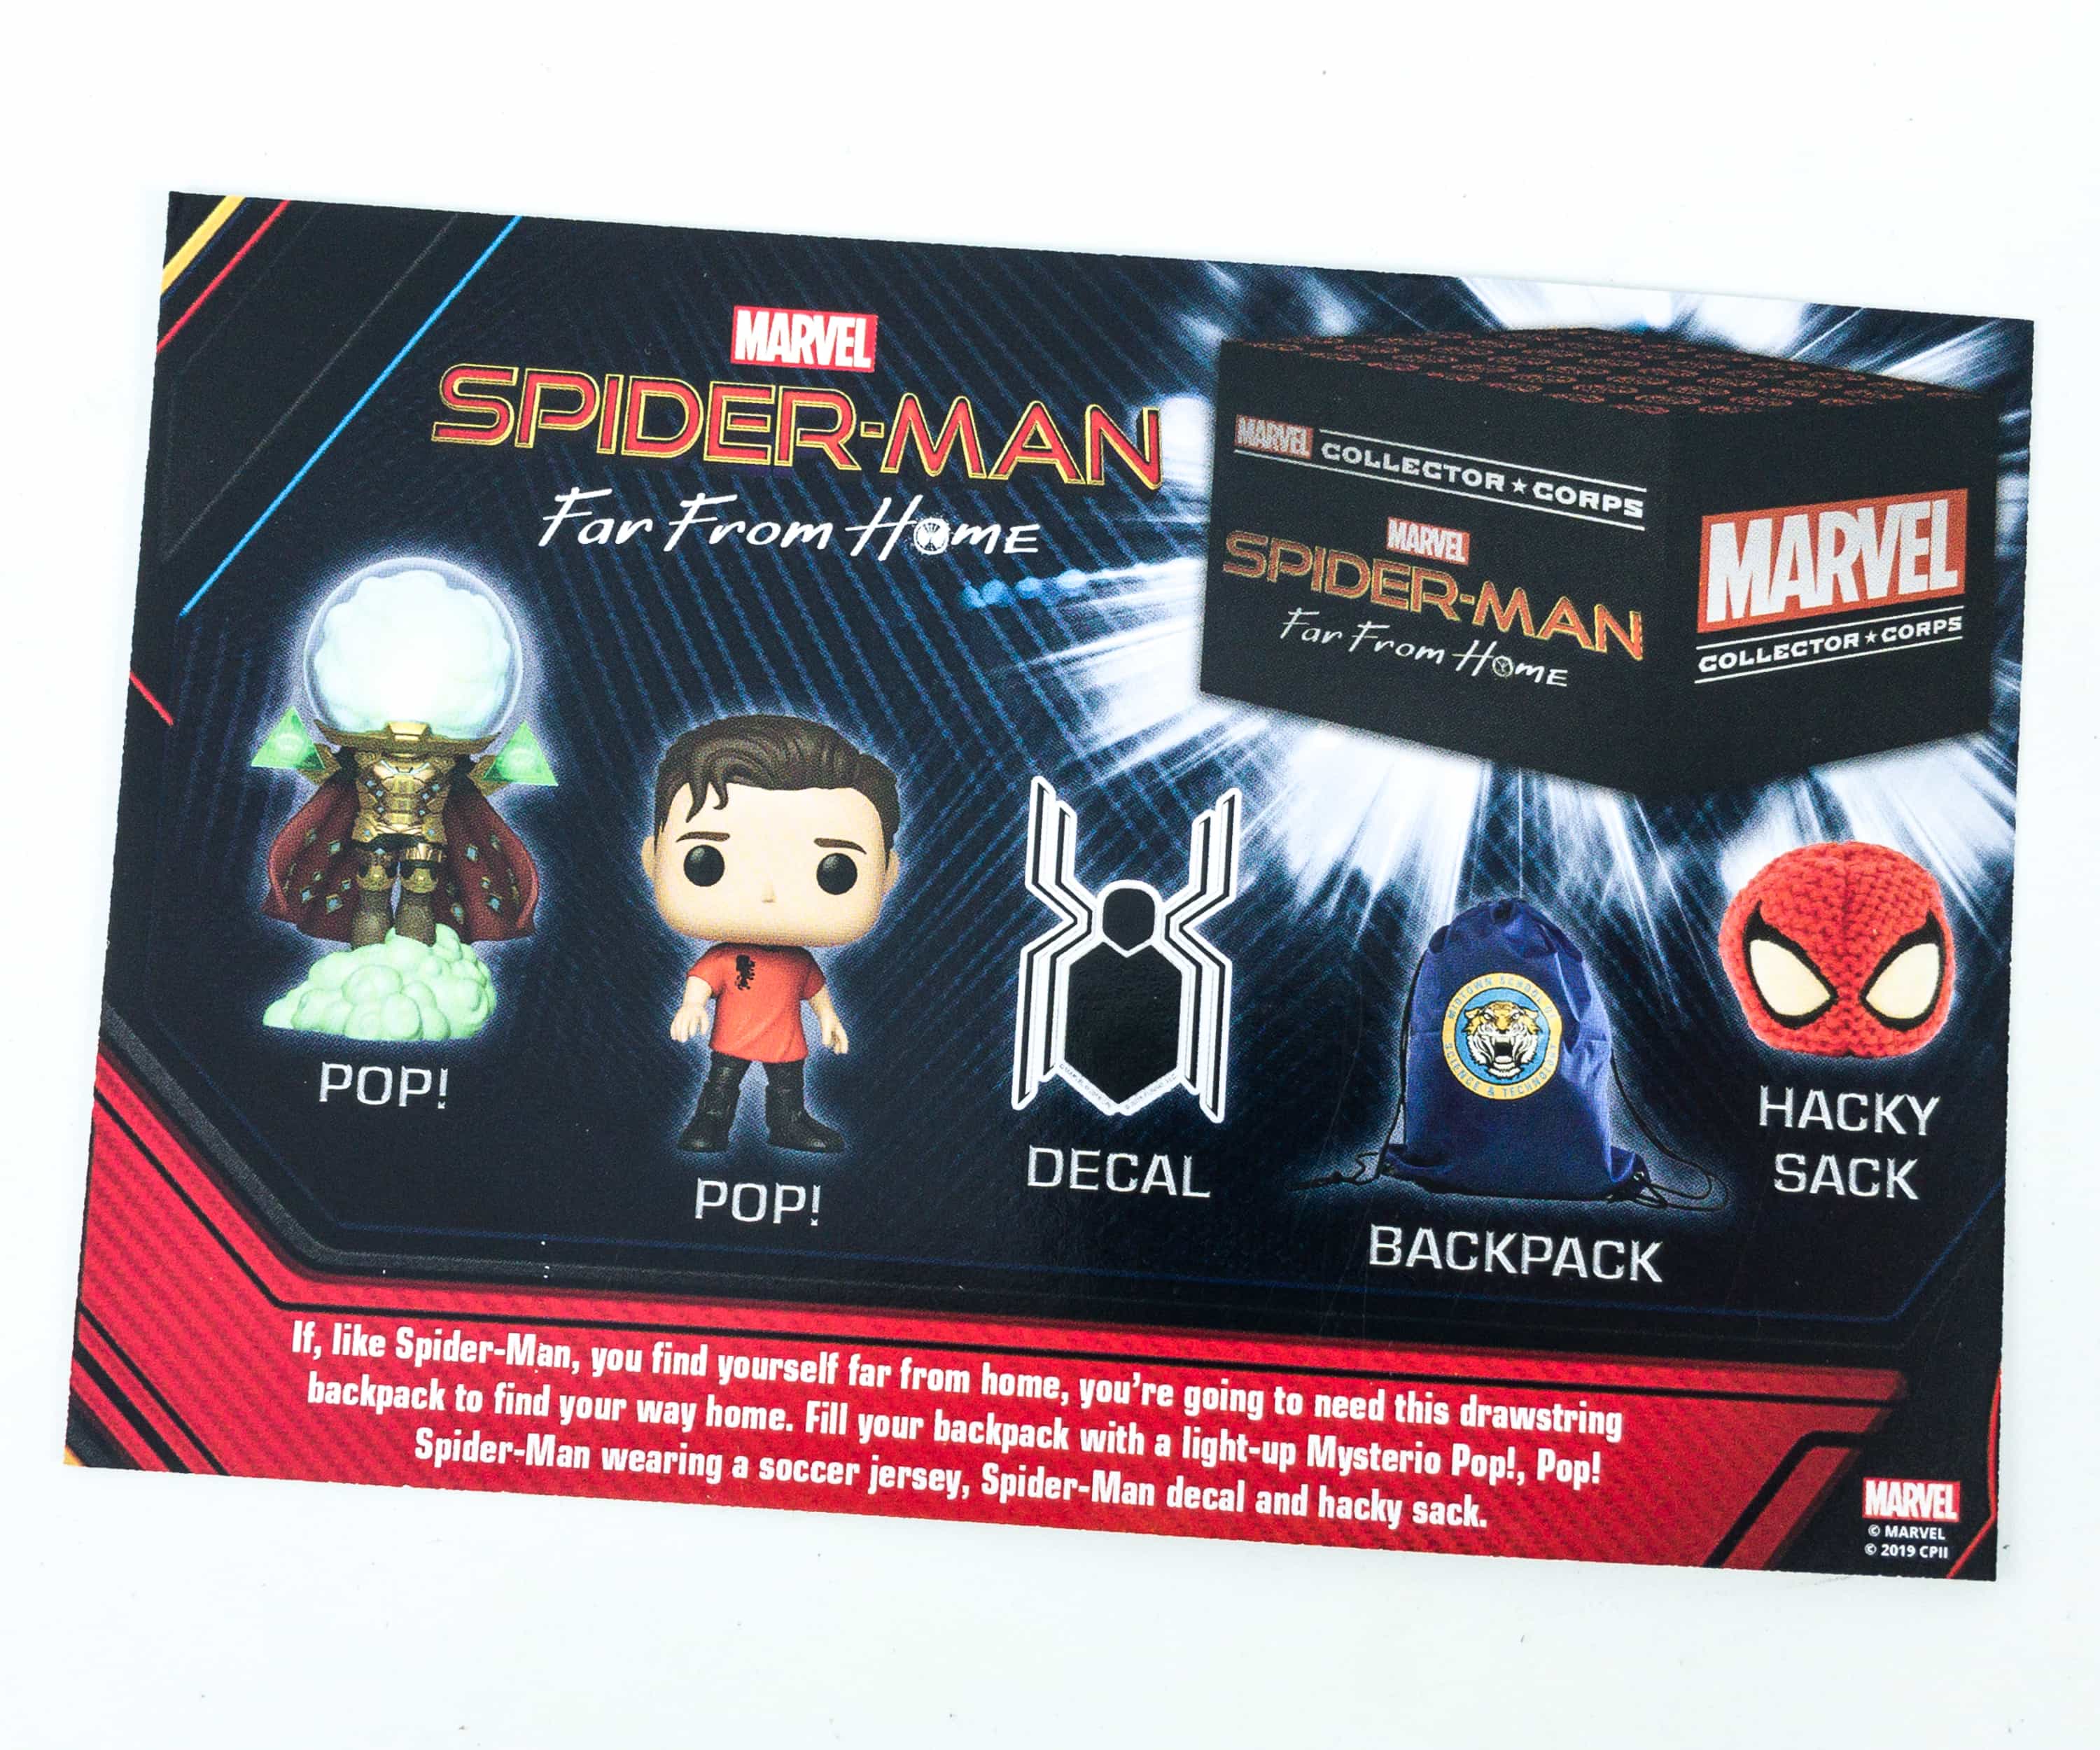 funko pop spider man far from home collector corps